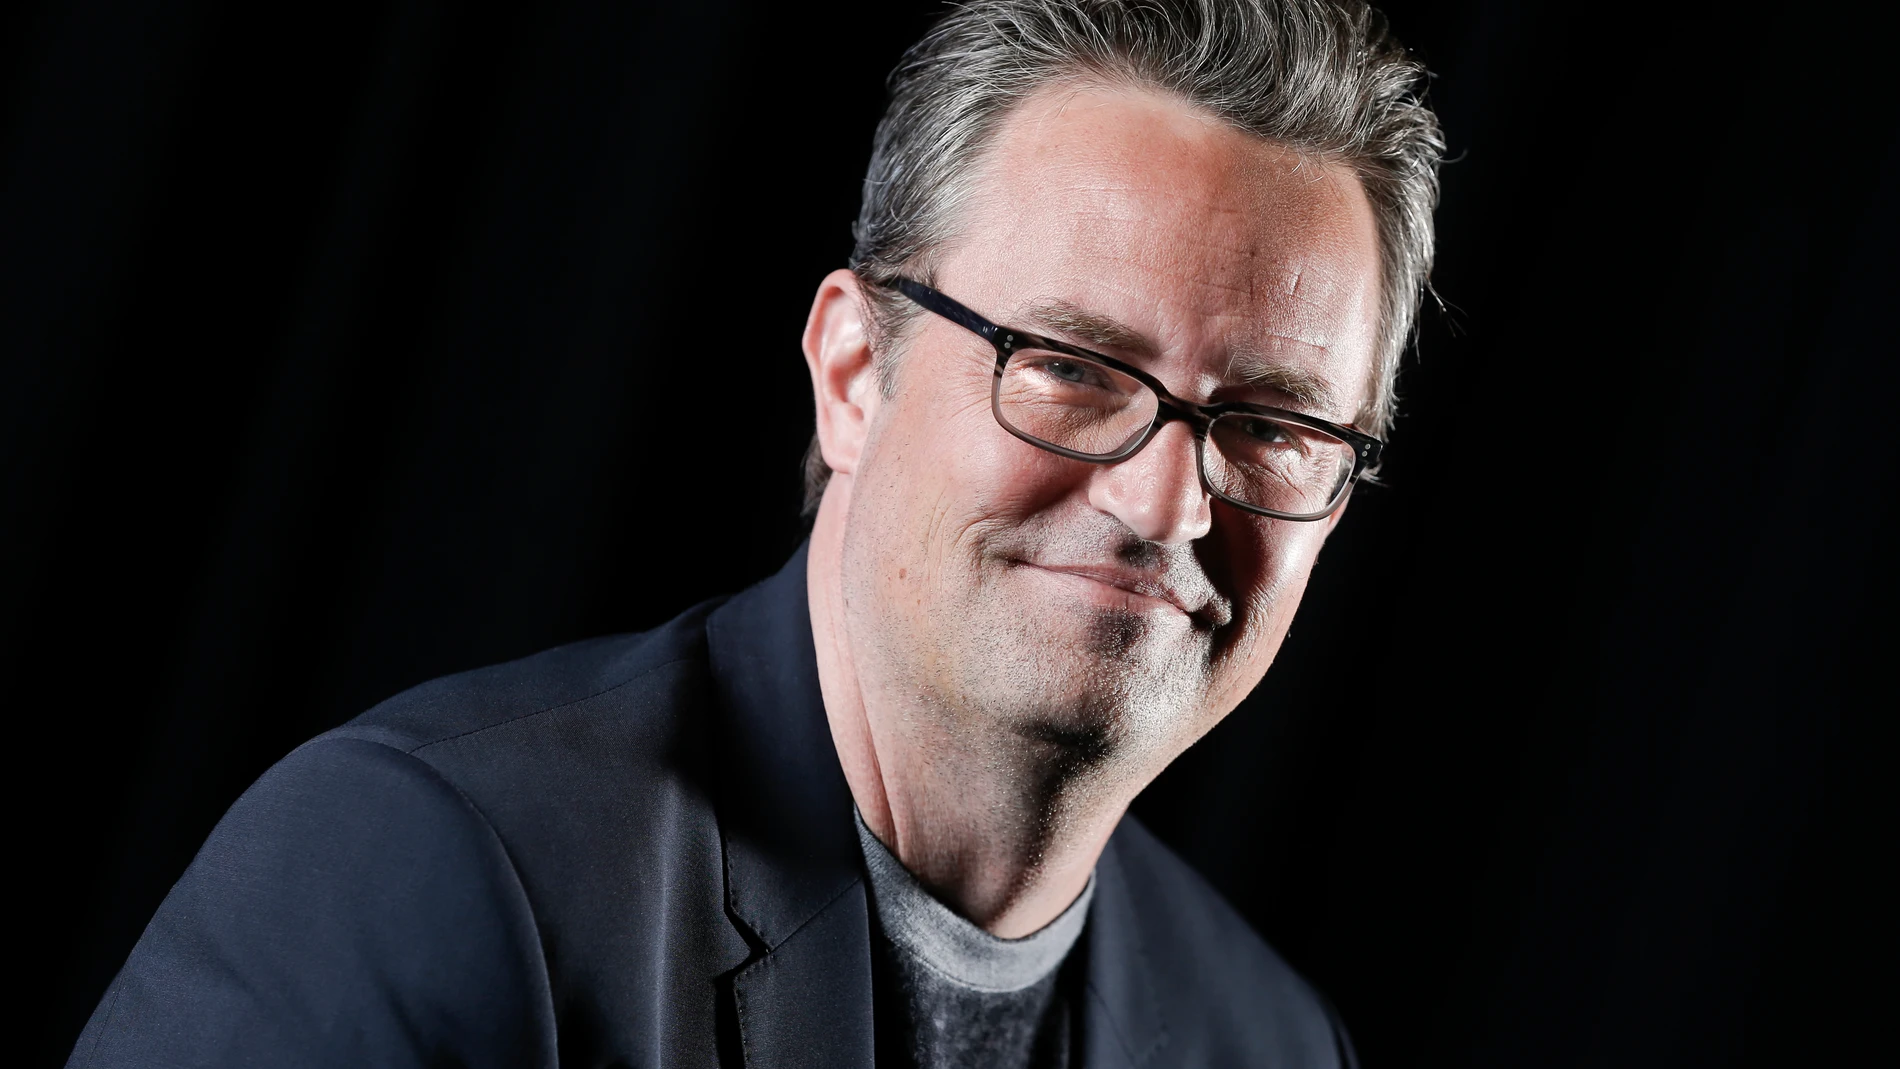 File - Matthew Perry poses for a portrait on Feb. 17, 2015, in New York. Perry, who starred Chandler Bing in the hit series “Friends,” has died. He was 54. The Emmy-nominated actor was found dead of an apparent drowning at his Los Angeles home on Saturday, according to the Los Angeles Times and celebrity website TMZ, which was the first to report the news. Both outlets cited unnamed sources confirming Perry’s death. His publicists and other representatives did not immediately return messages ...